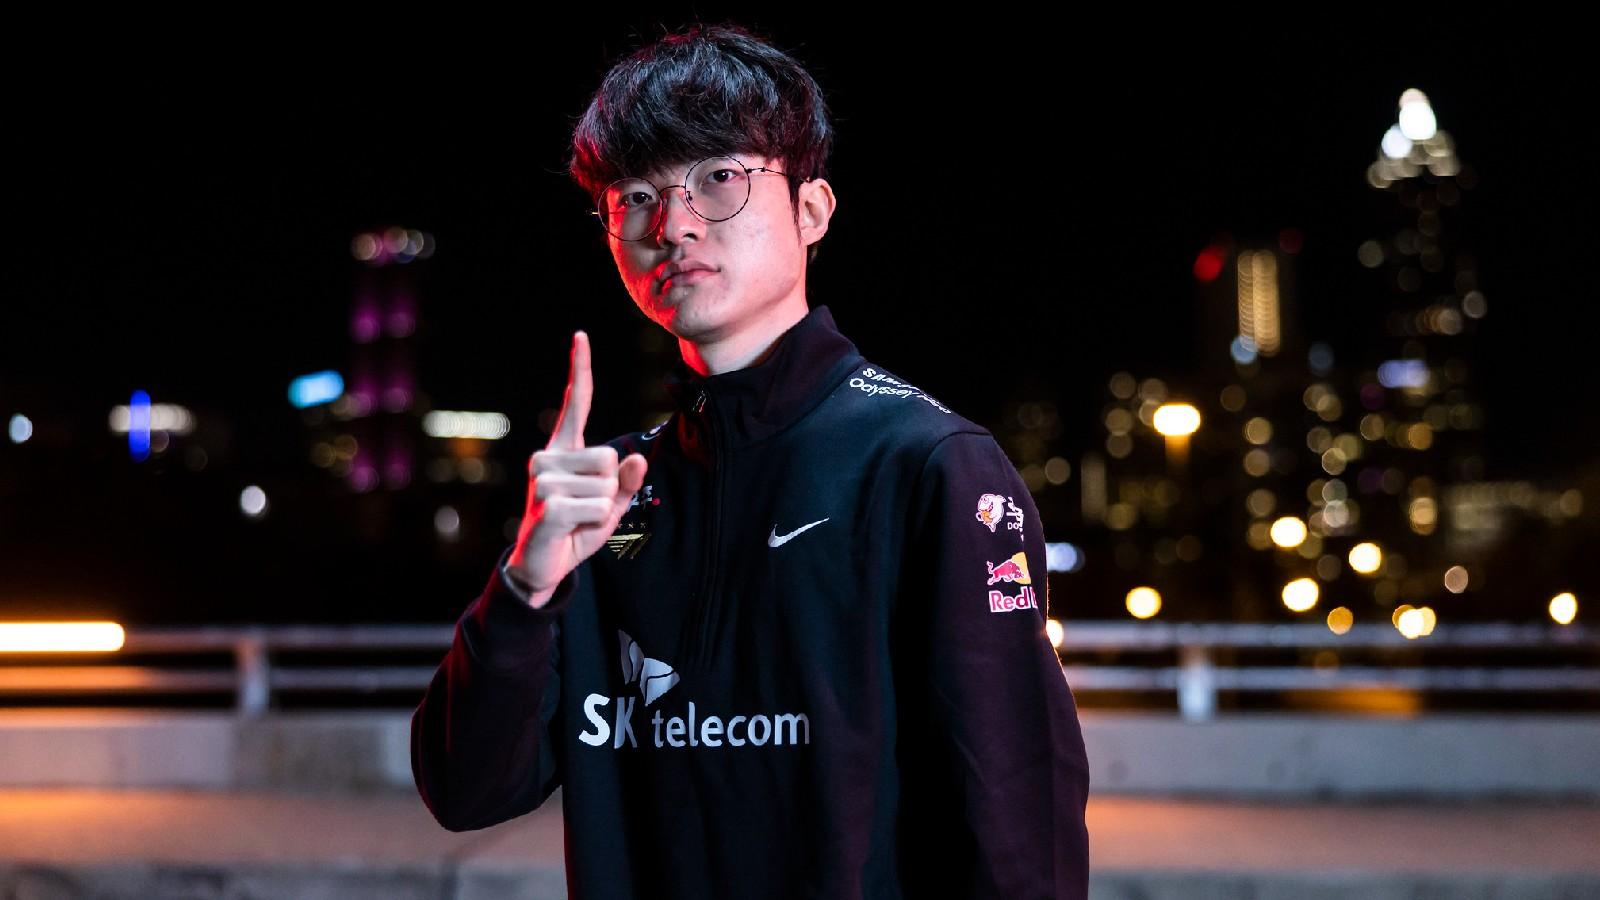 T1 Faker Worlds 2022